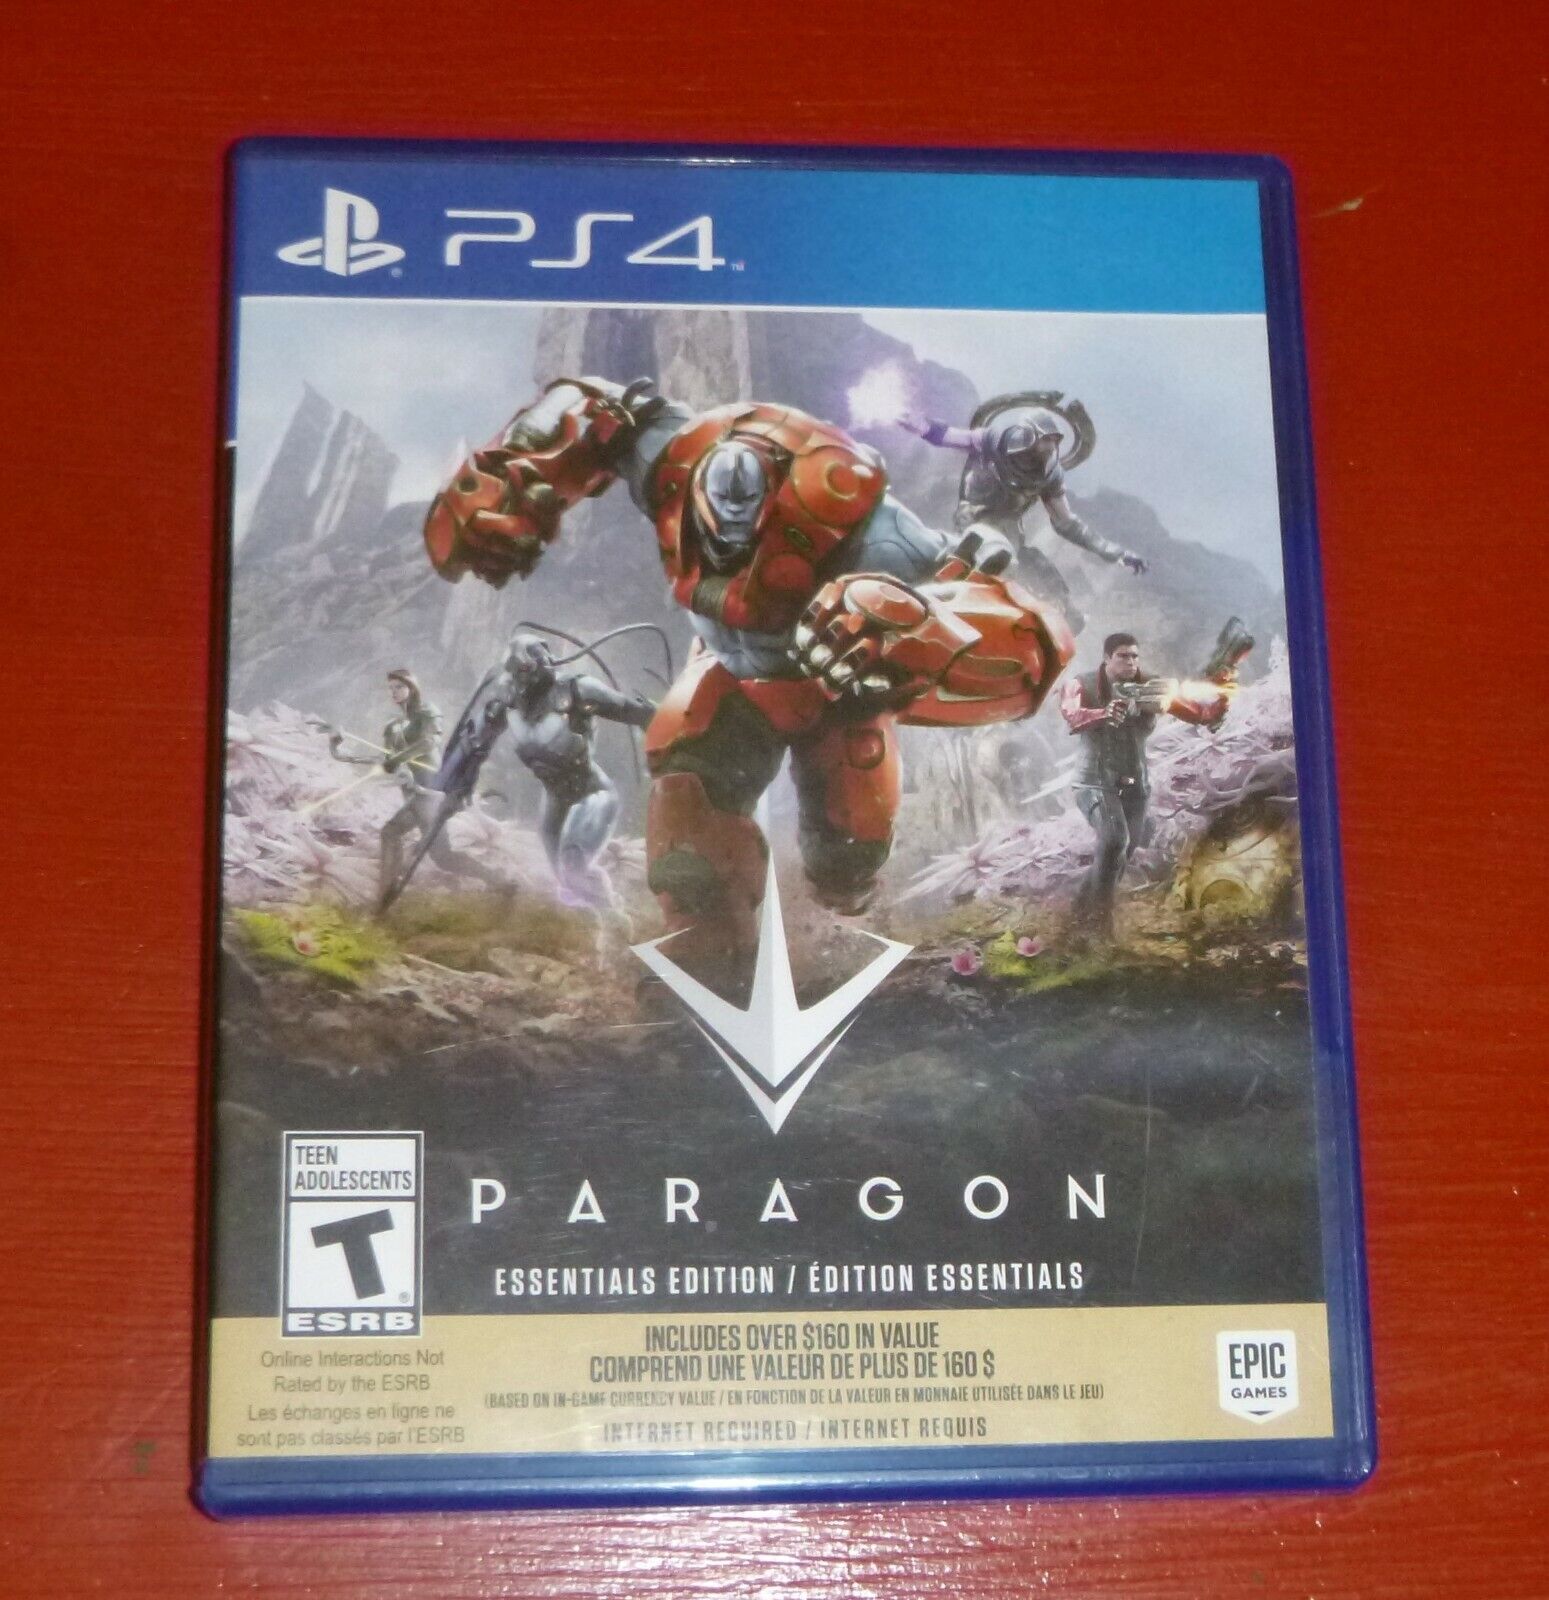 Paragon Essentials Edition Ps4 Sony 4 for sale online | eBay